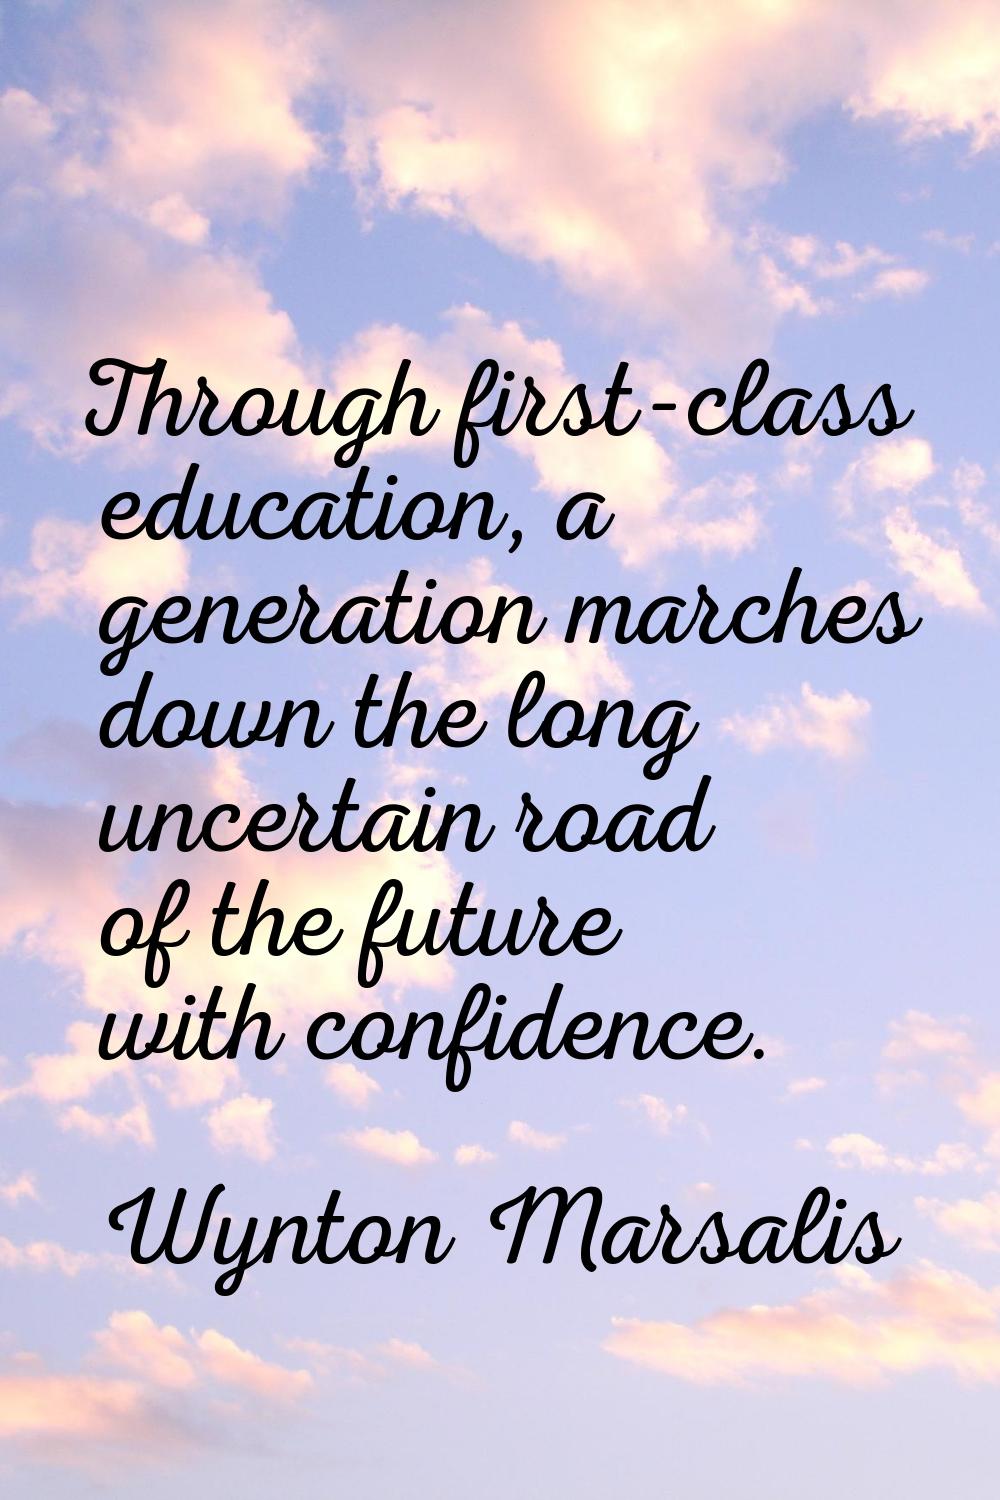 Through first-class education, a generation marches down the long uncertain road of the future with